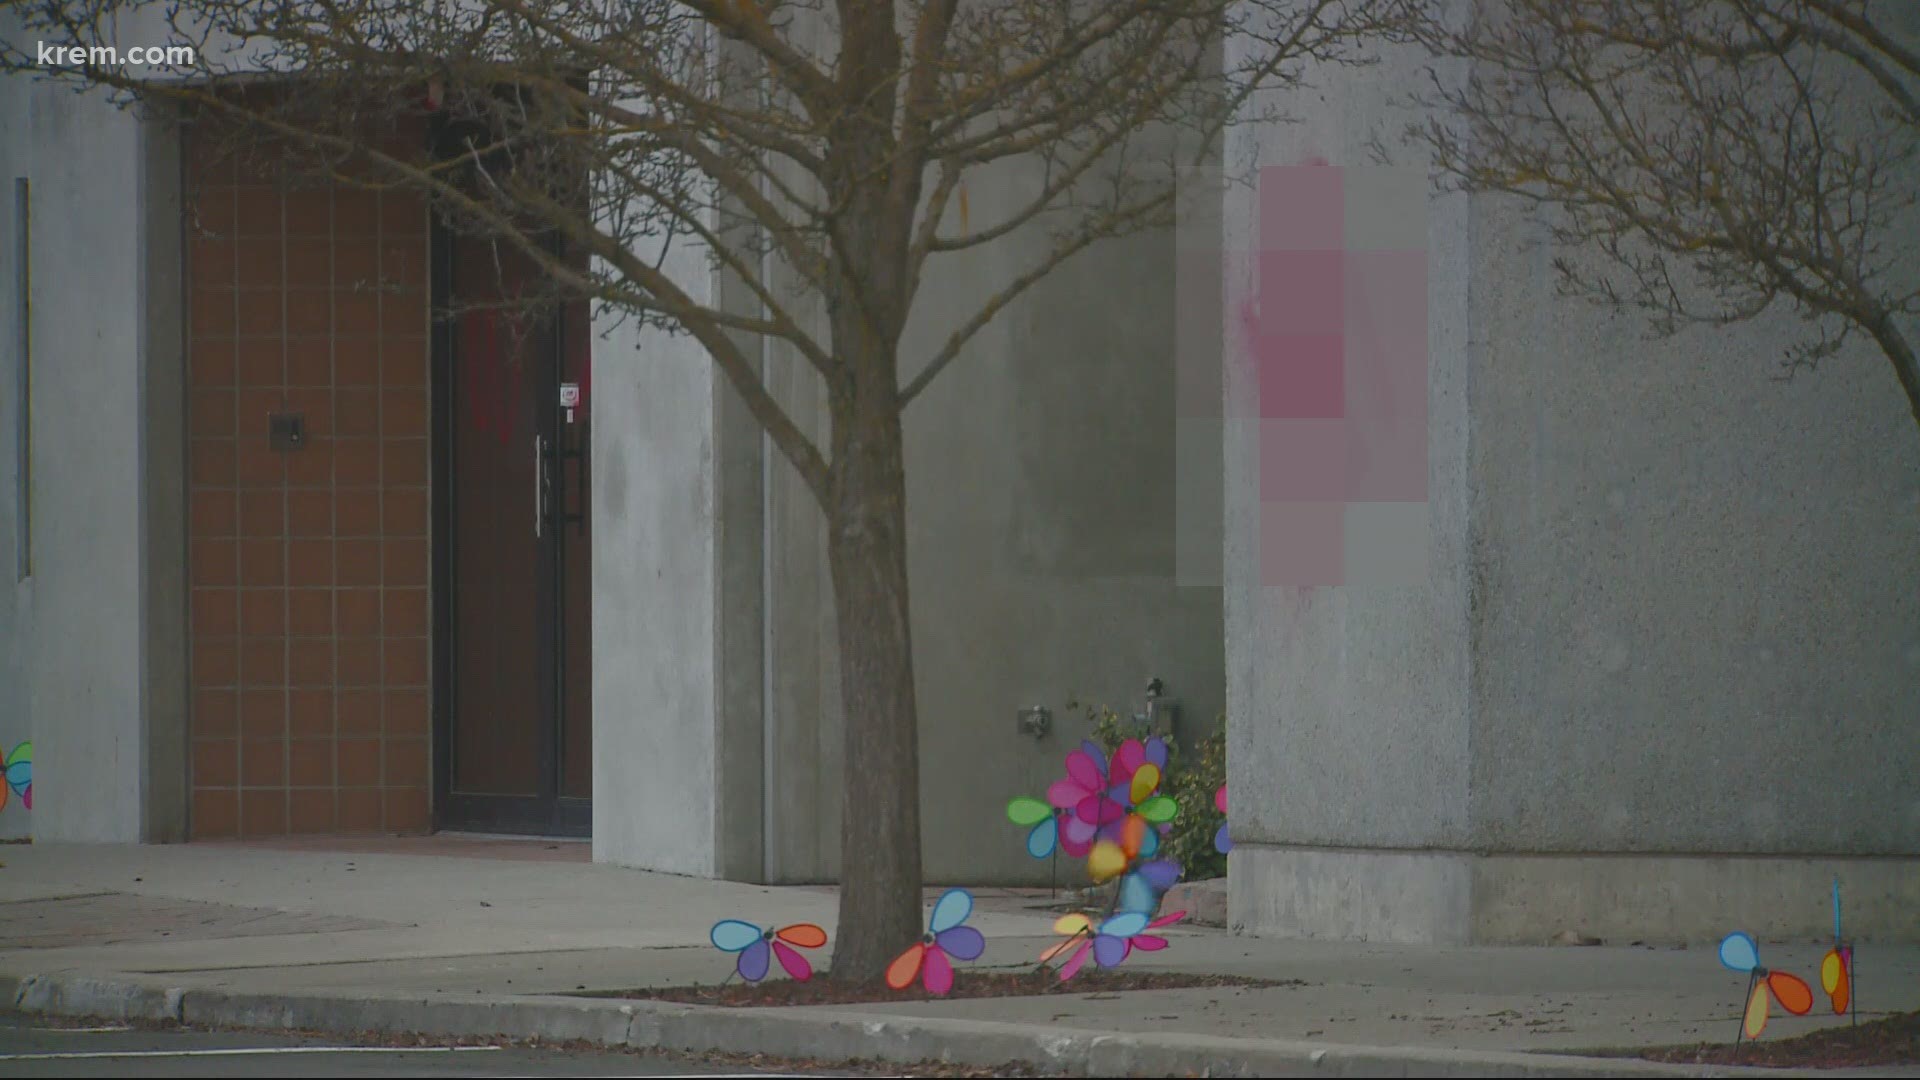 Police previously said they were investigating the vandalism as malicious harassment and it falls under Washington state's definition of a hate crime.